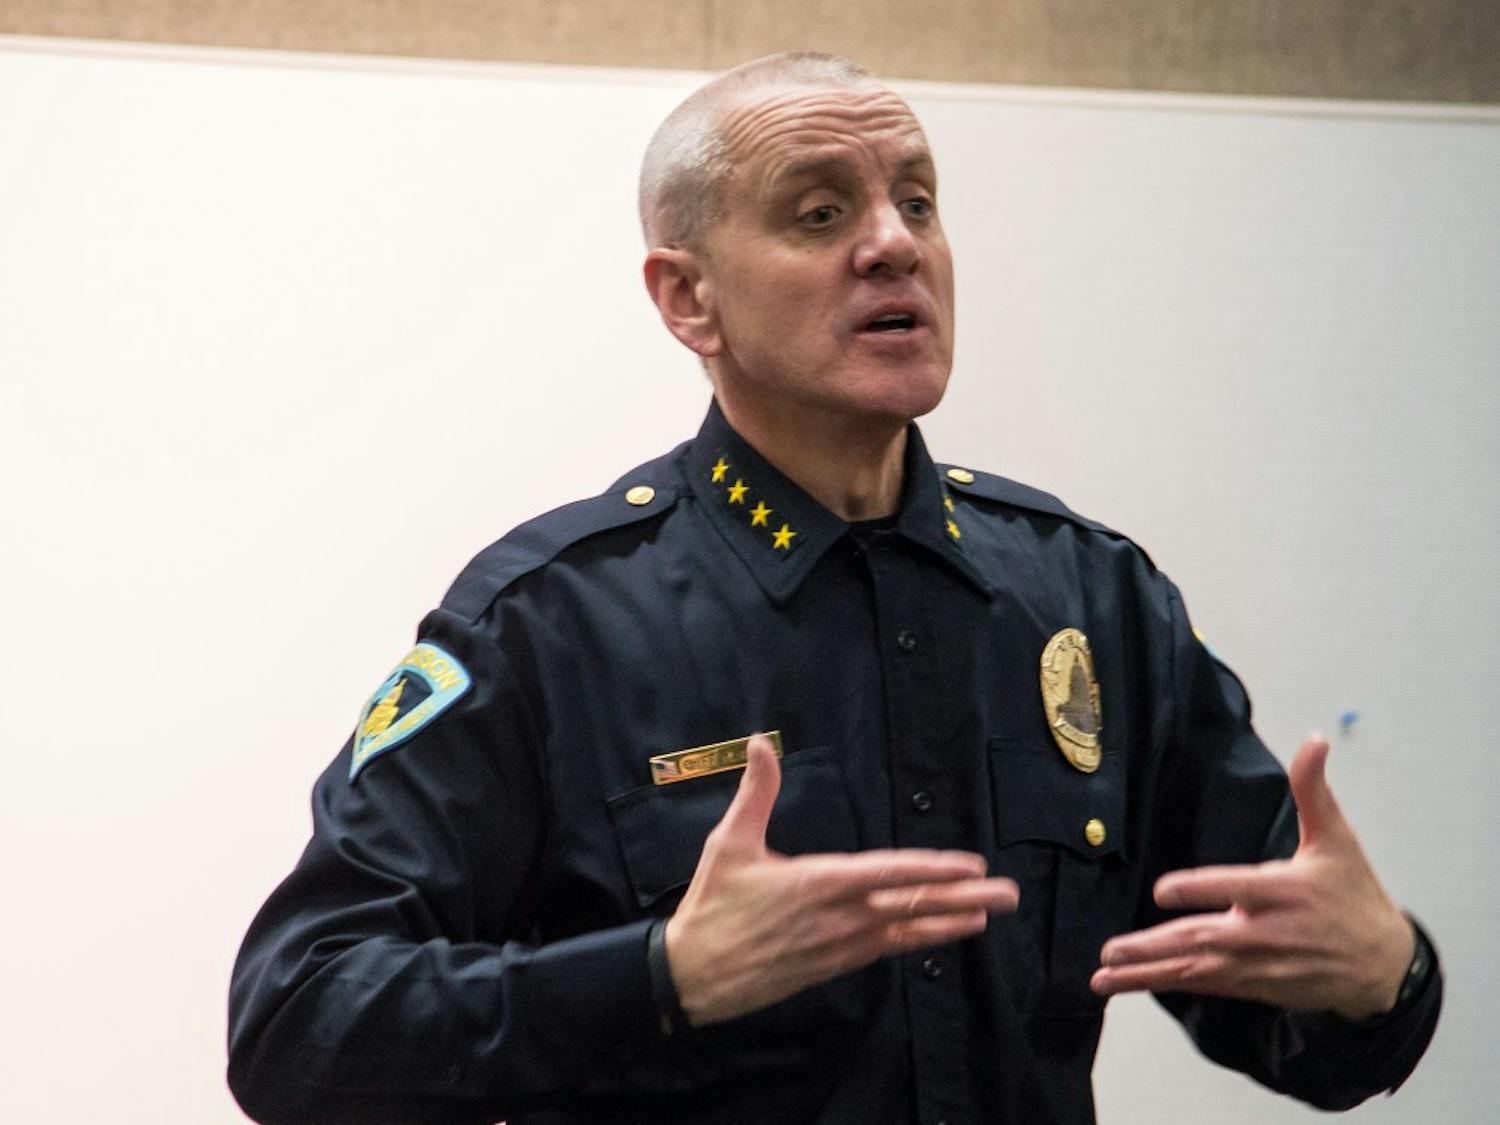 Madison Police Chief Mike Koval&nbsp;testified against a bill that would sanction cities for preventing law enforcement from asking about a person's immigration status.